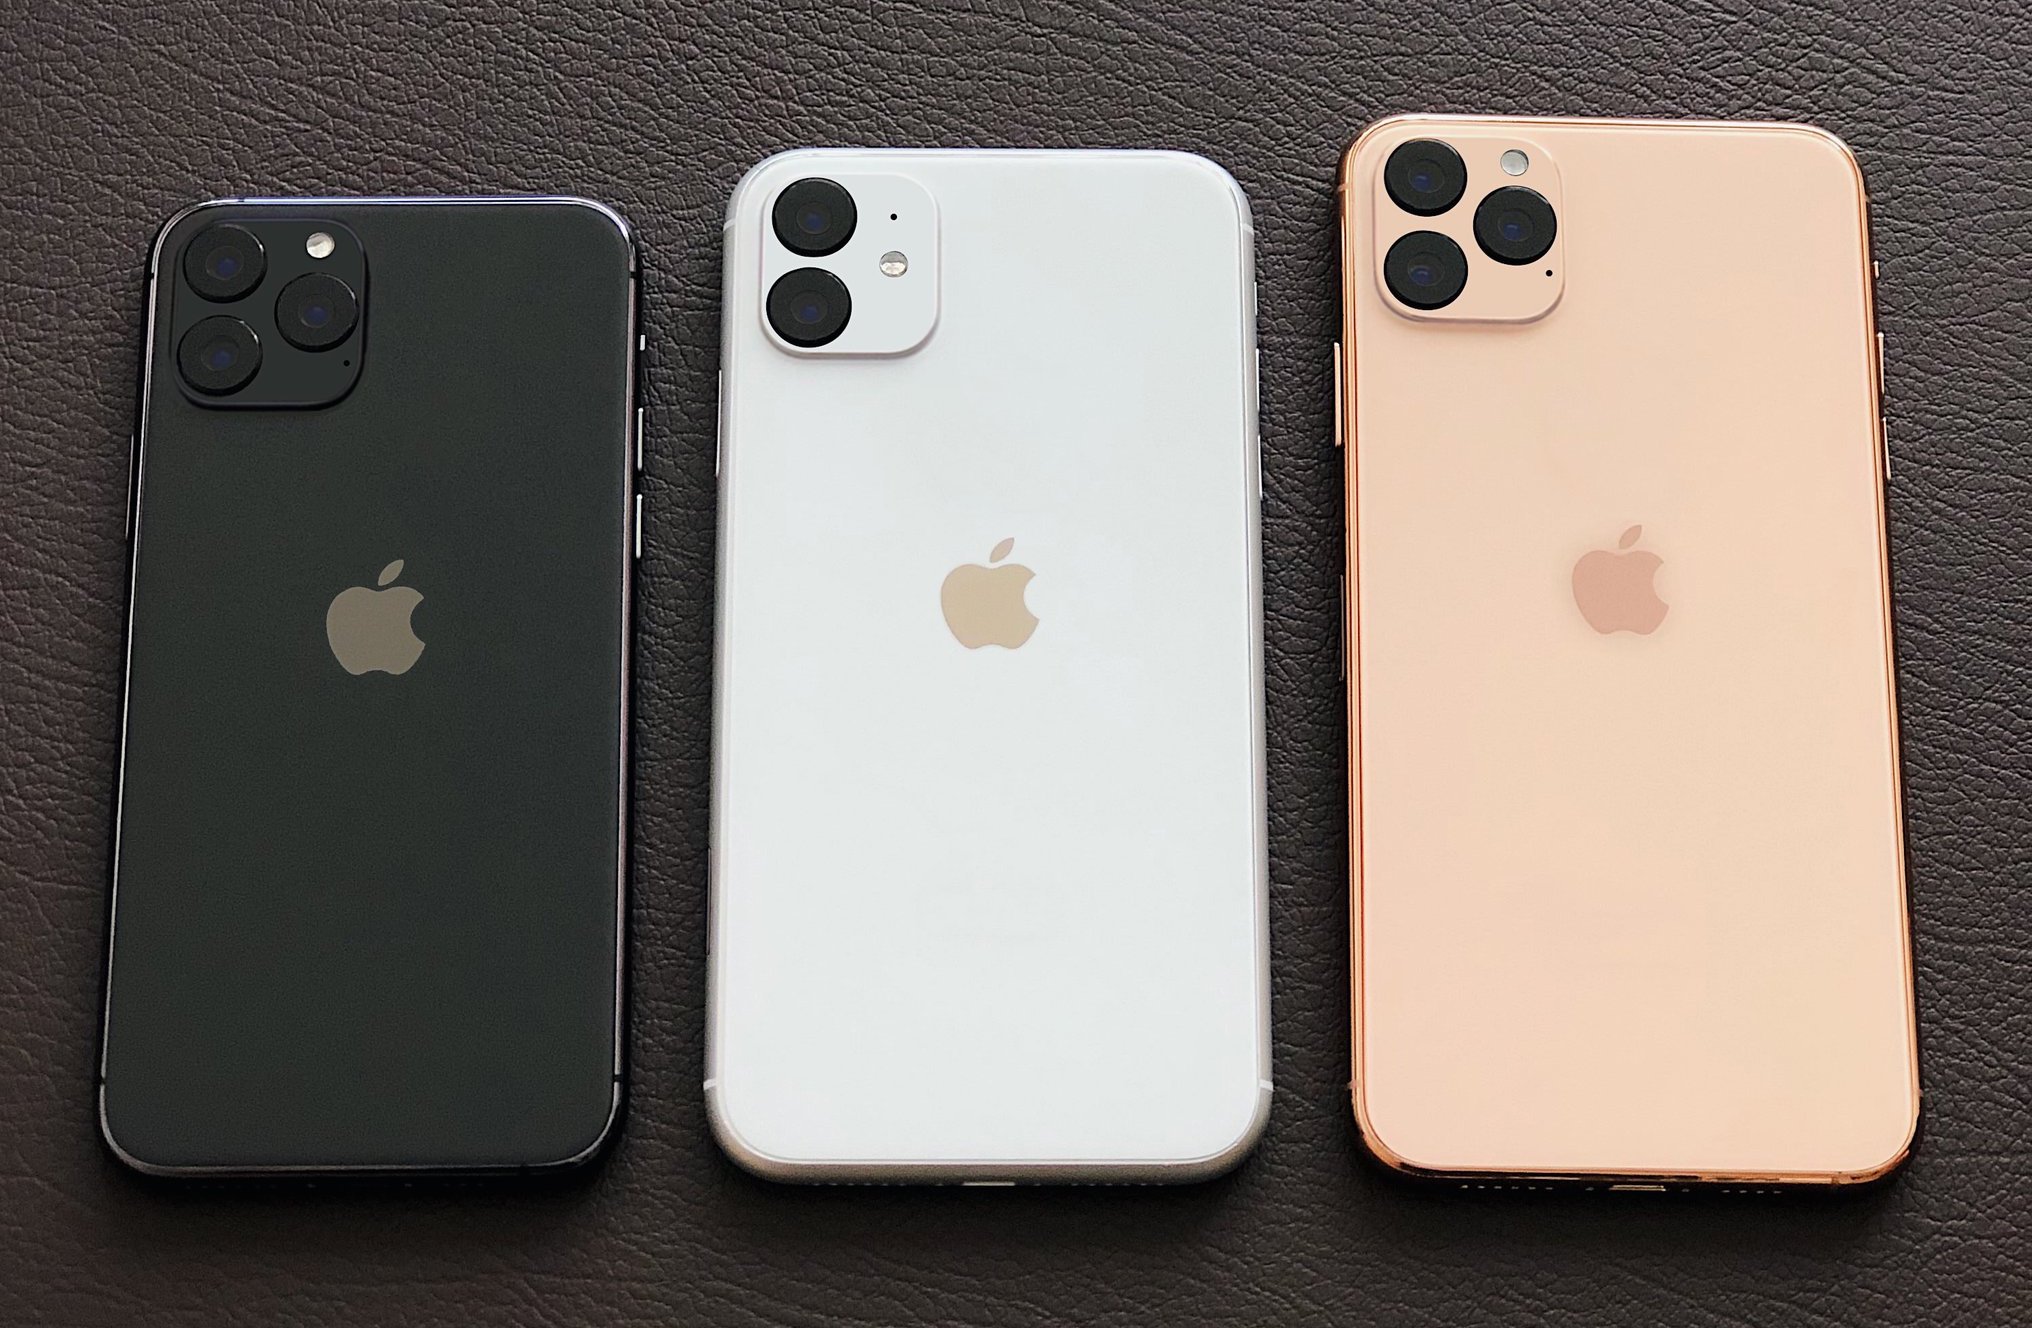 Cases Show Iphone 11 Design Including New Position Of Apple Logo